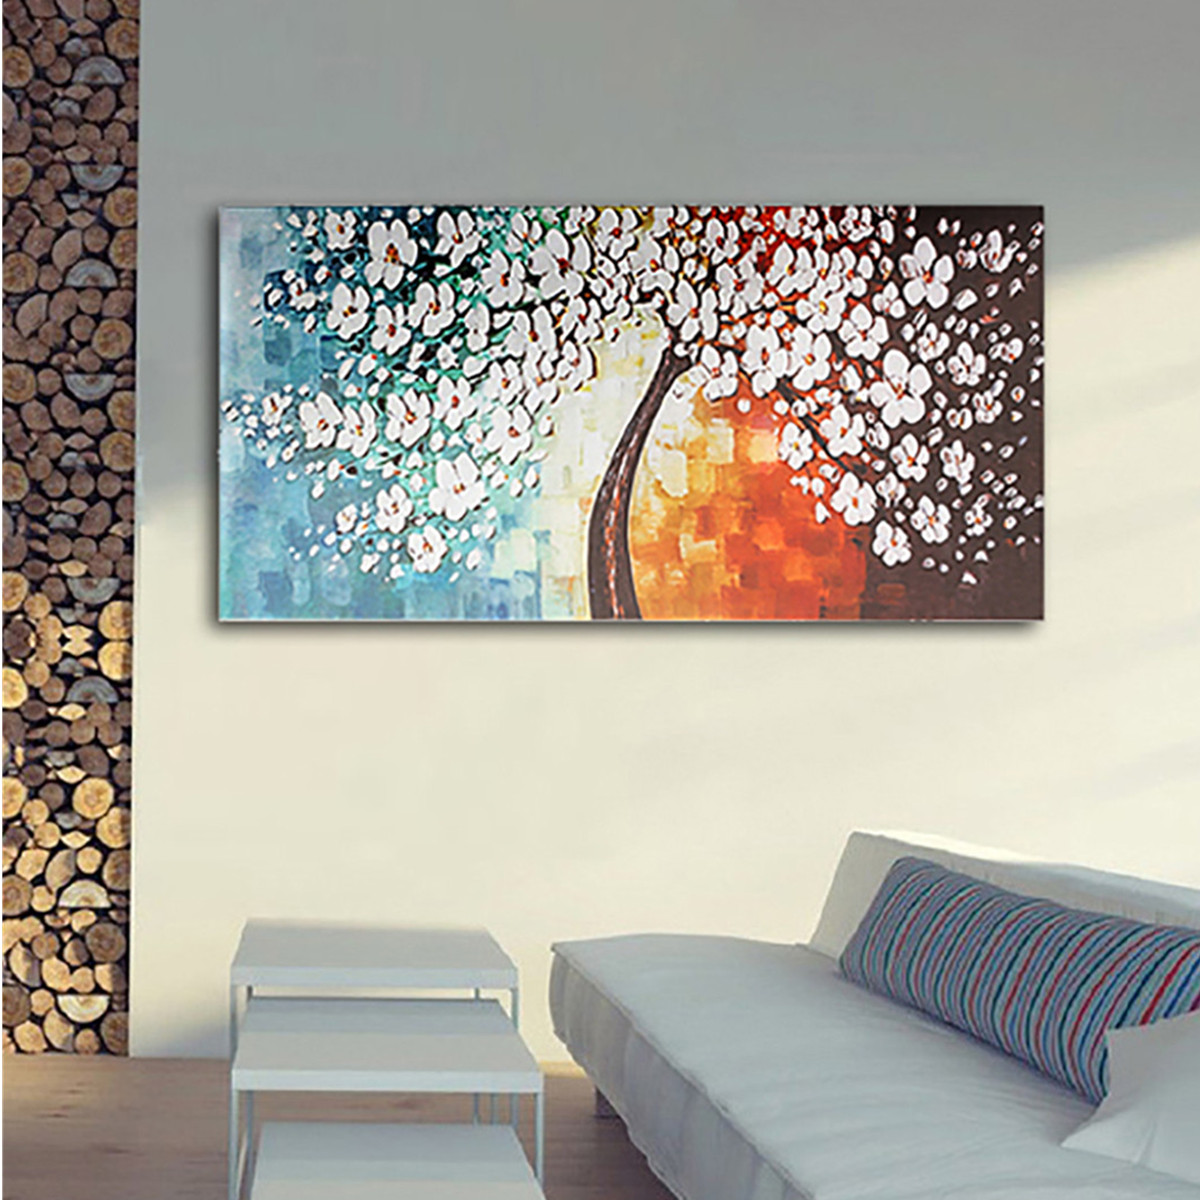 White-Plum-Flower-Tree-Oil-Paintings-Unframed-Canvas-Print-Wall-Art-Picture-Home-Decorations-1582919-2